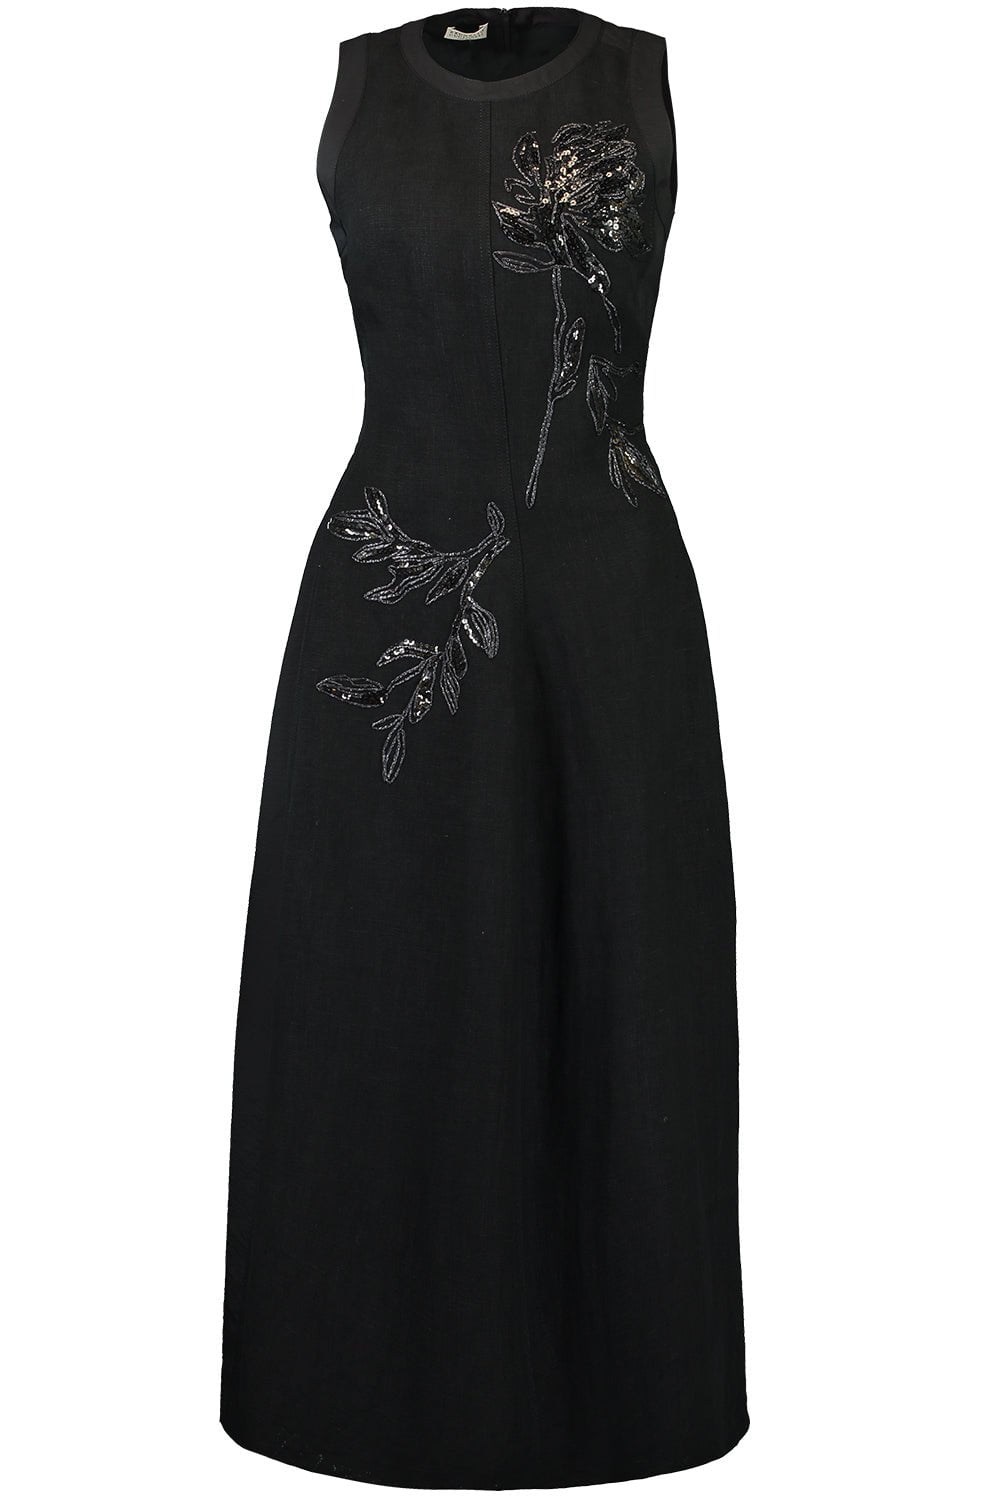 Embroidered Magnolia Flower Structured Dress CLOTHINGDRESSCASUAL BRUNELLO CUCINELLI   